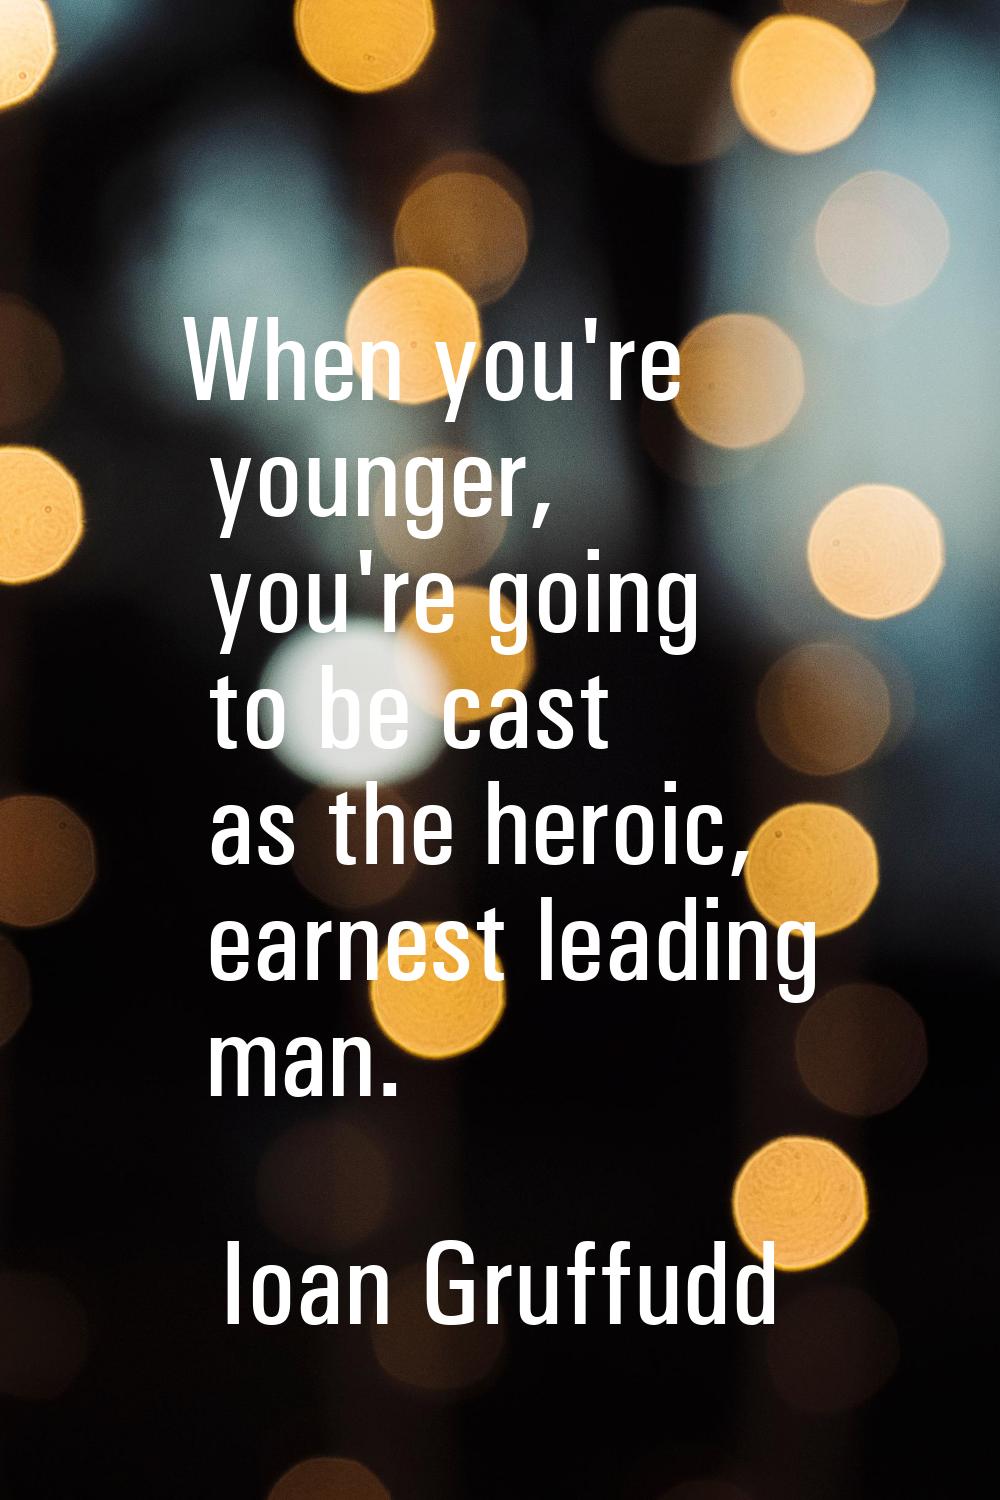 When you're younger, you're going to be cast as the heroic, earnest leading man.